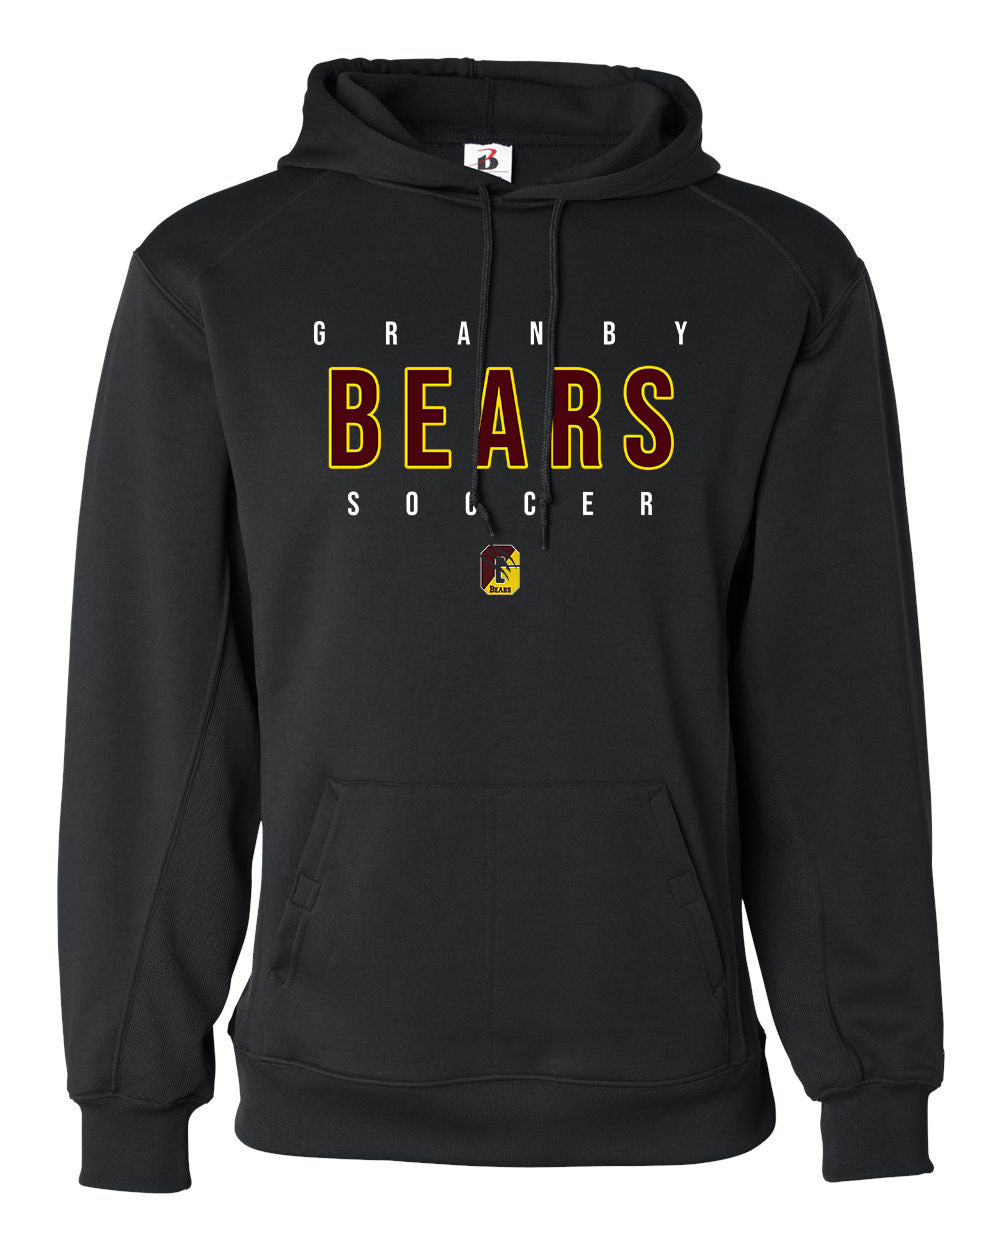 Granby Girls Soccer Hoodie - 1454 (color options available)